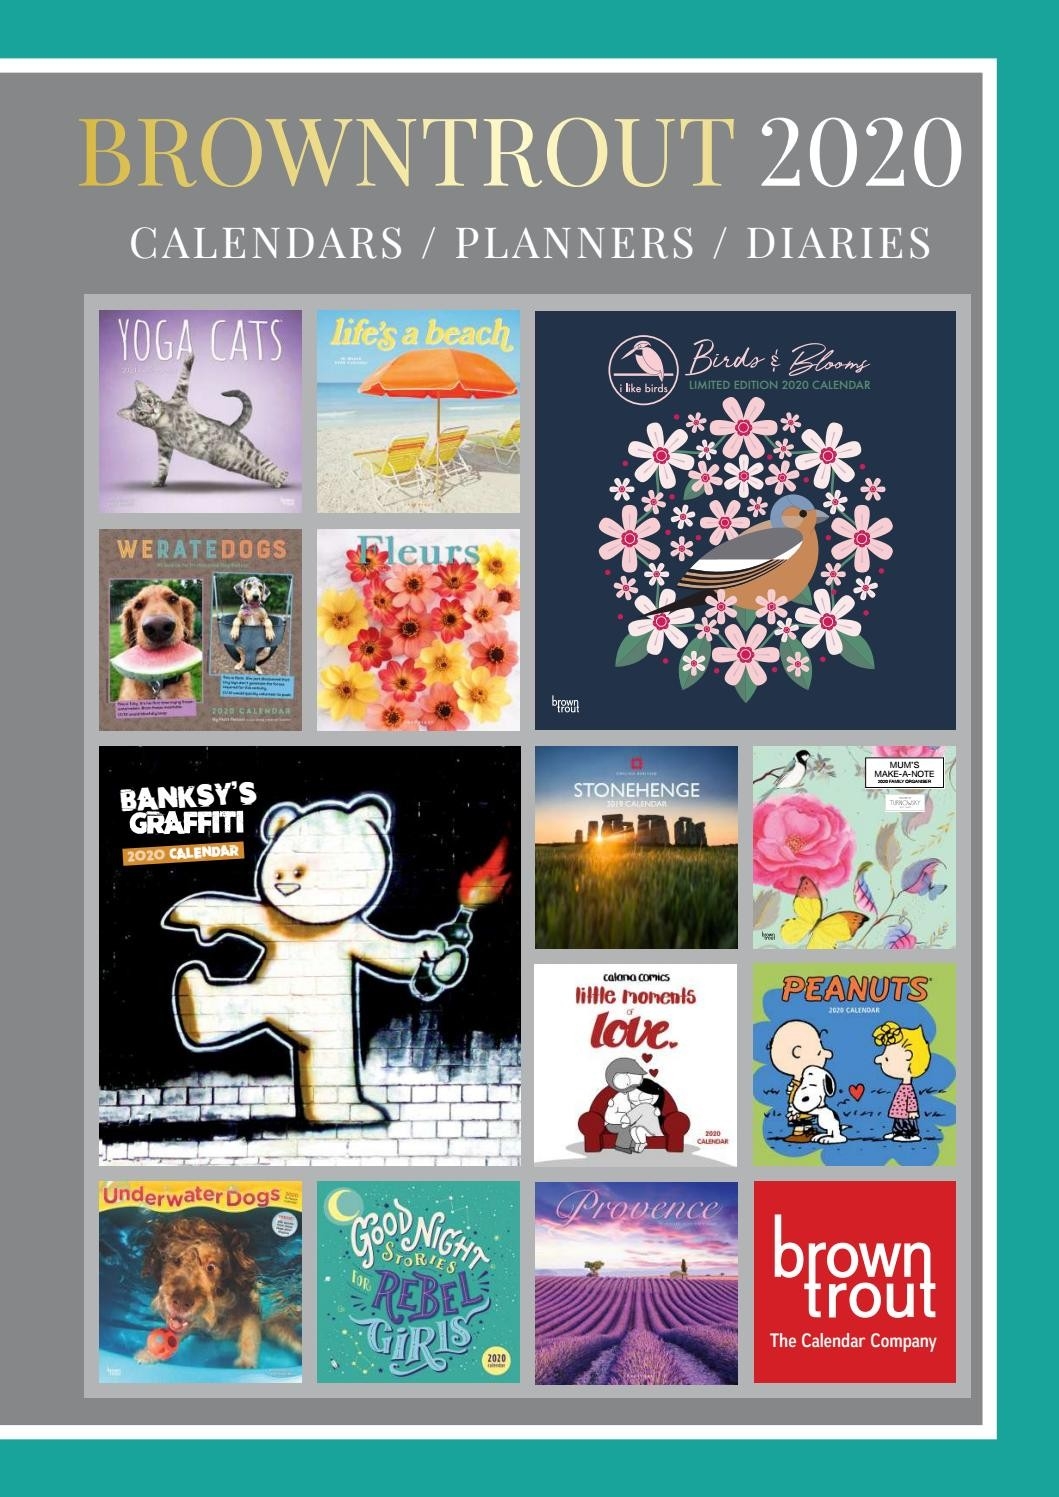 Browntrout Publishers Ltd Uk 2020 Calendar Catalogue By-202 Calendar Printable With Jewish Holidays